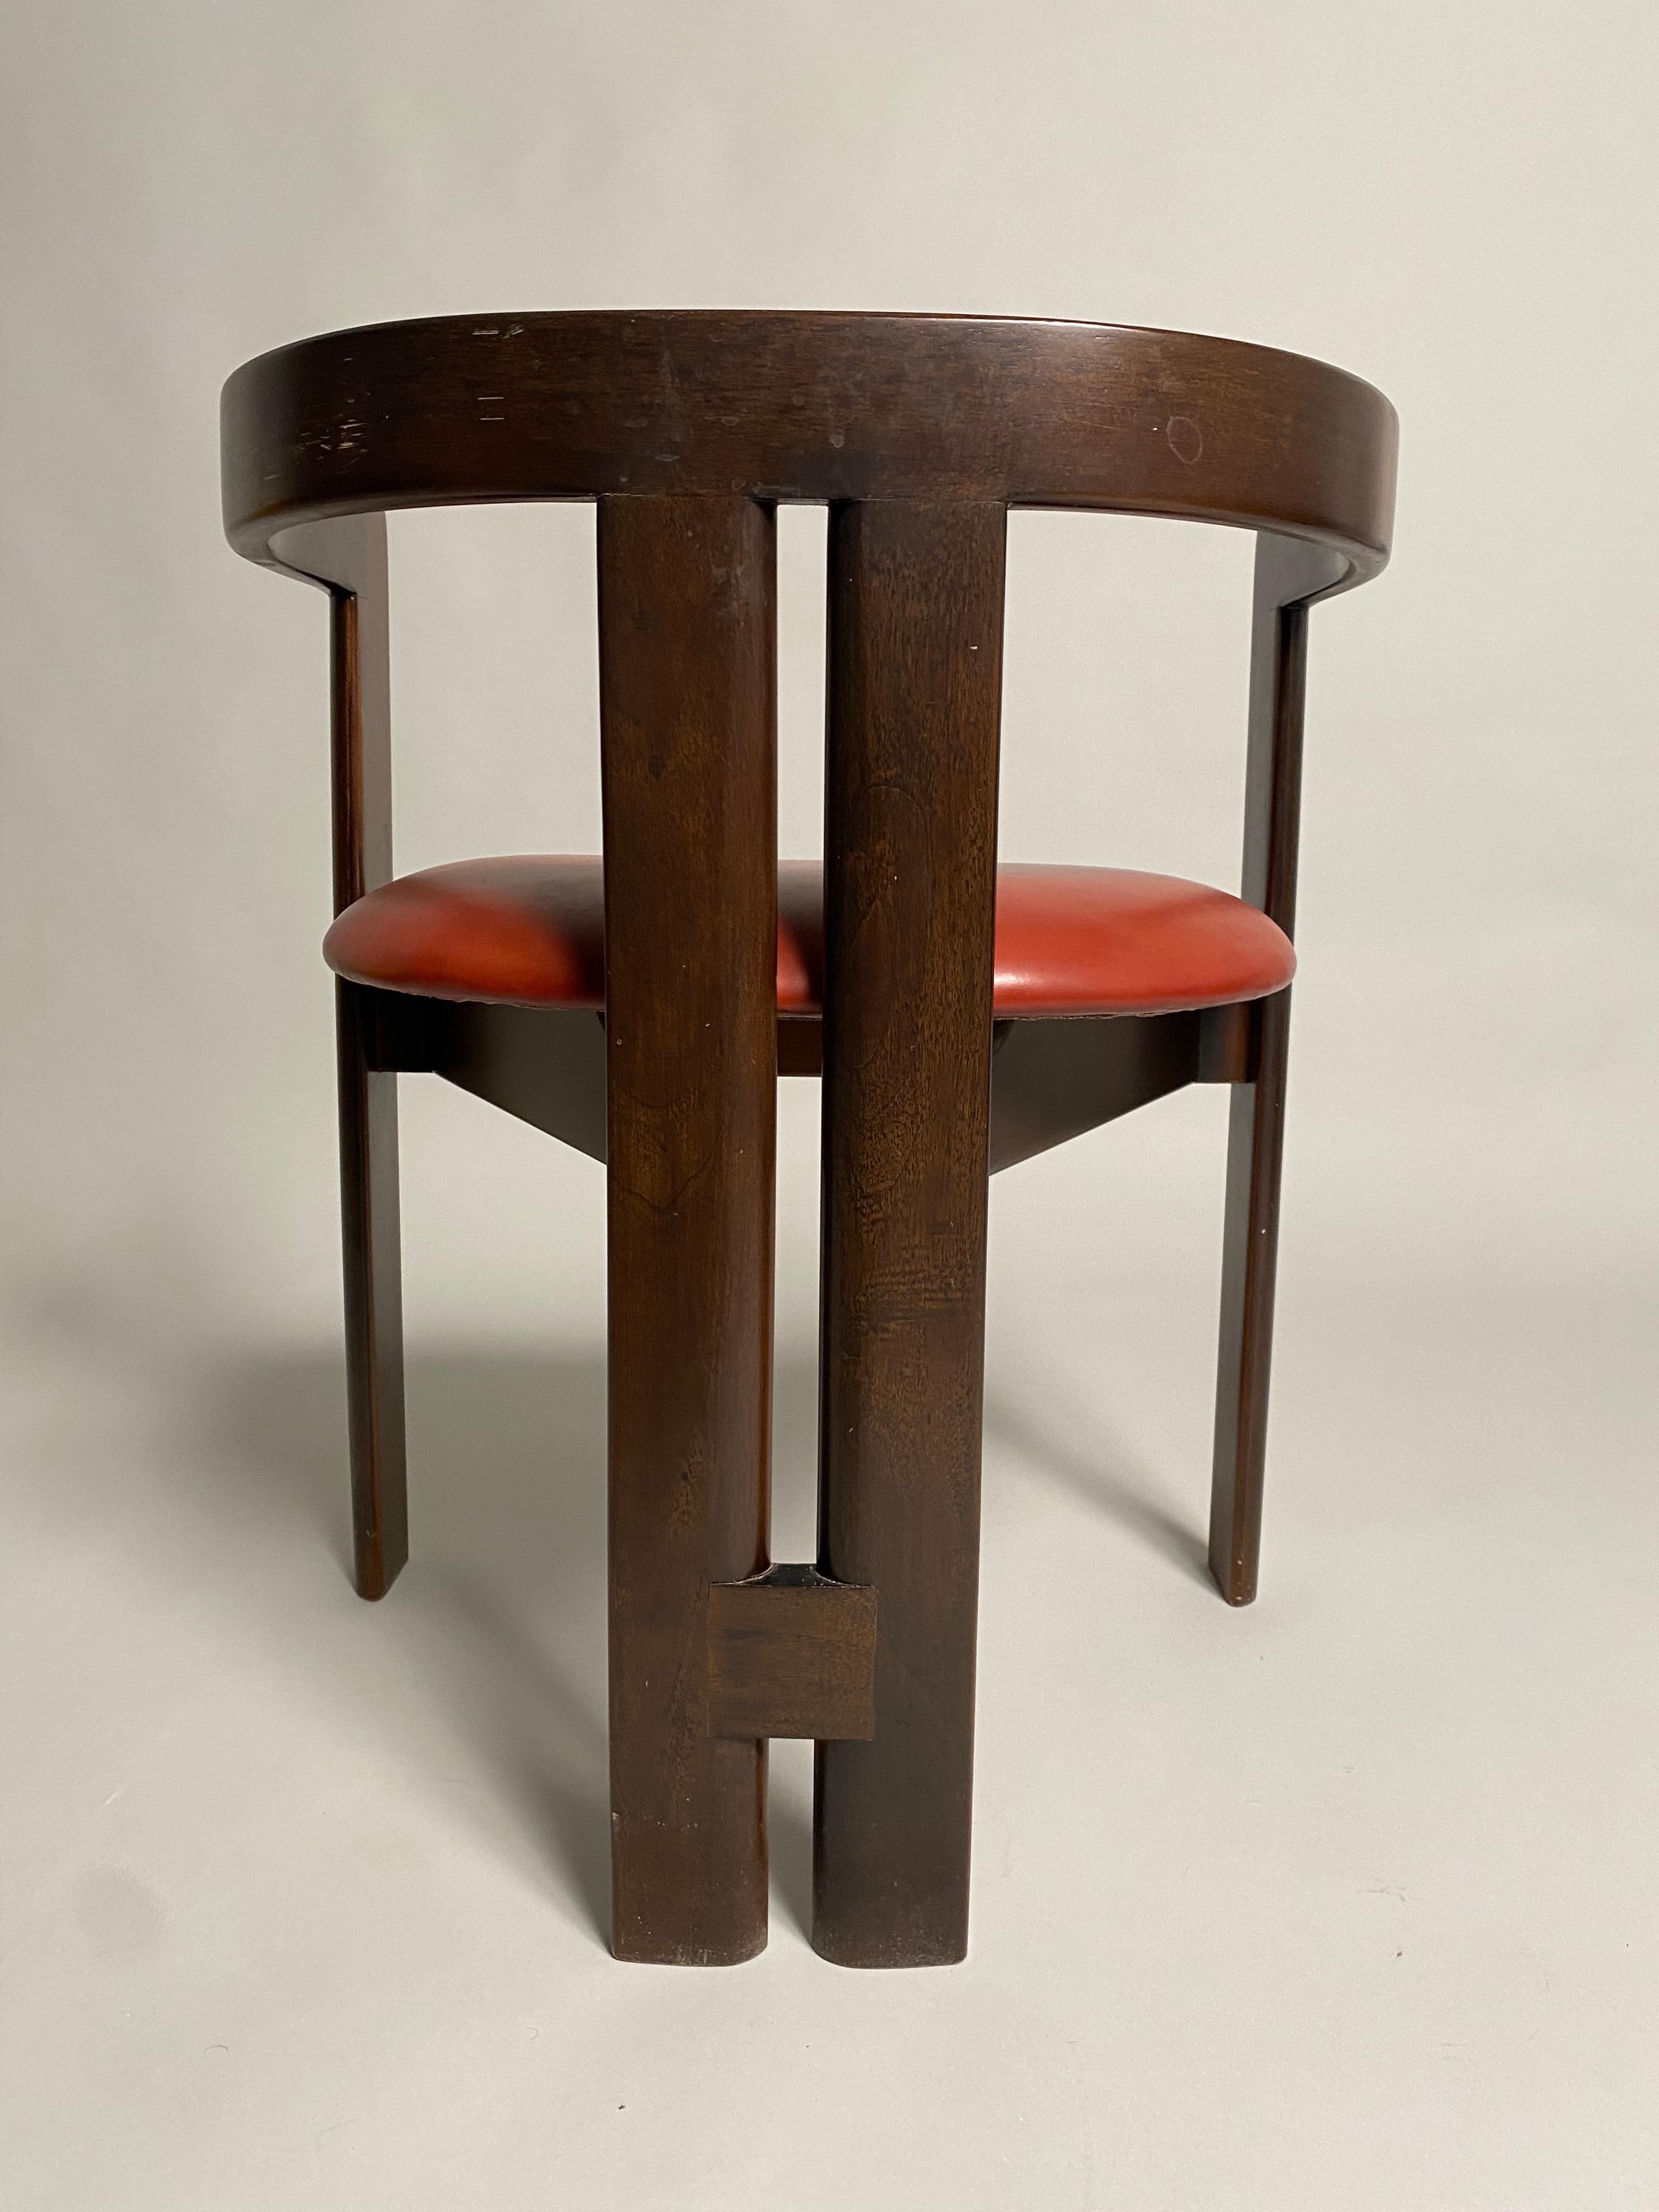 Italian Tobia Scarpa, two Pigreco wooden chairs for Gavina, set of two (1959)